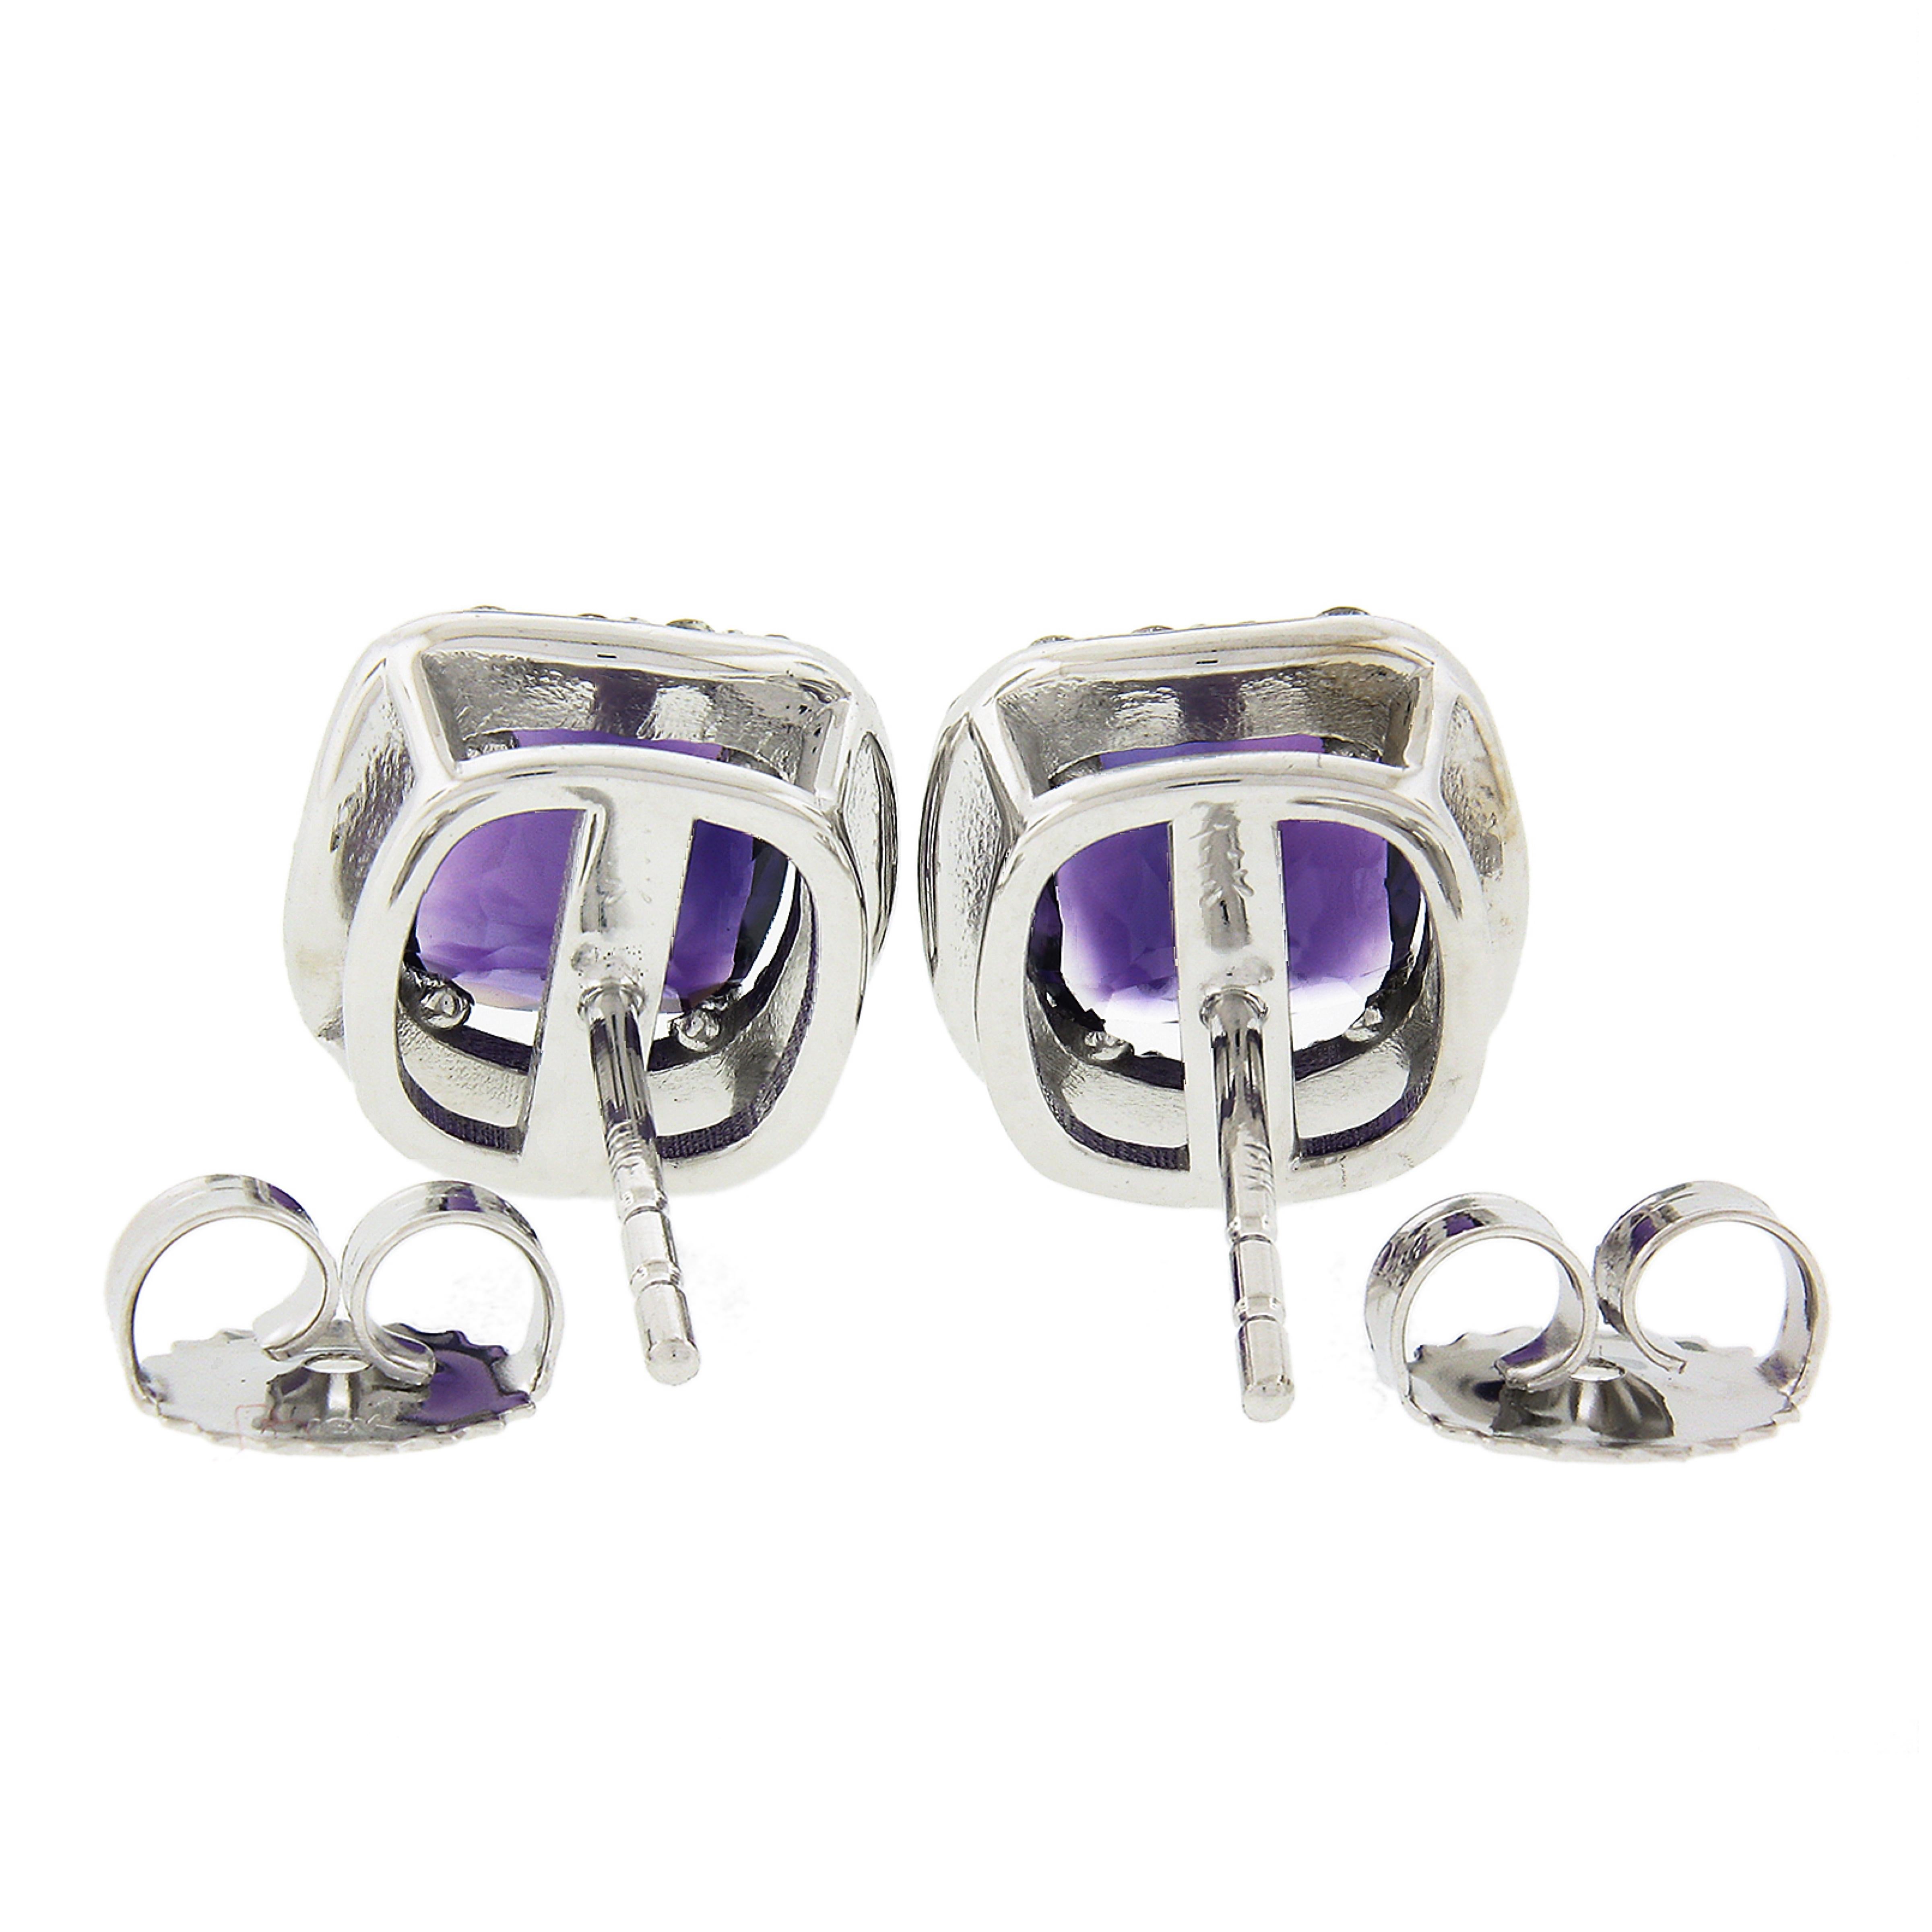 You are looking at magnificent brand new pair of amethyst and diamond stud earrings solidly and very well crafted in 18k white gold. The fine quality amethysts are cushion brilliant cuts and weigh 2.40 carats in weight. They are neatly prong set and